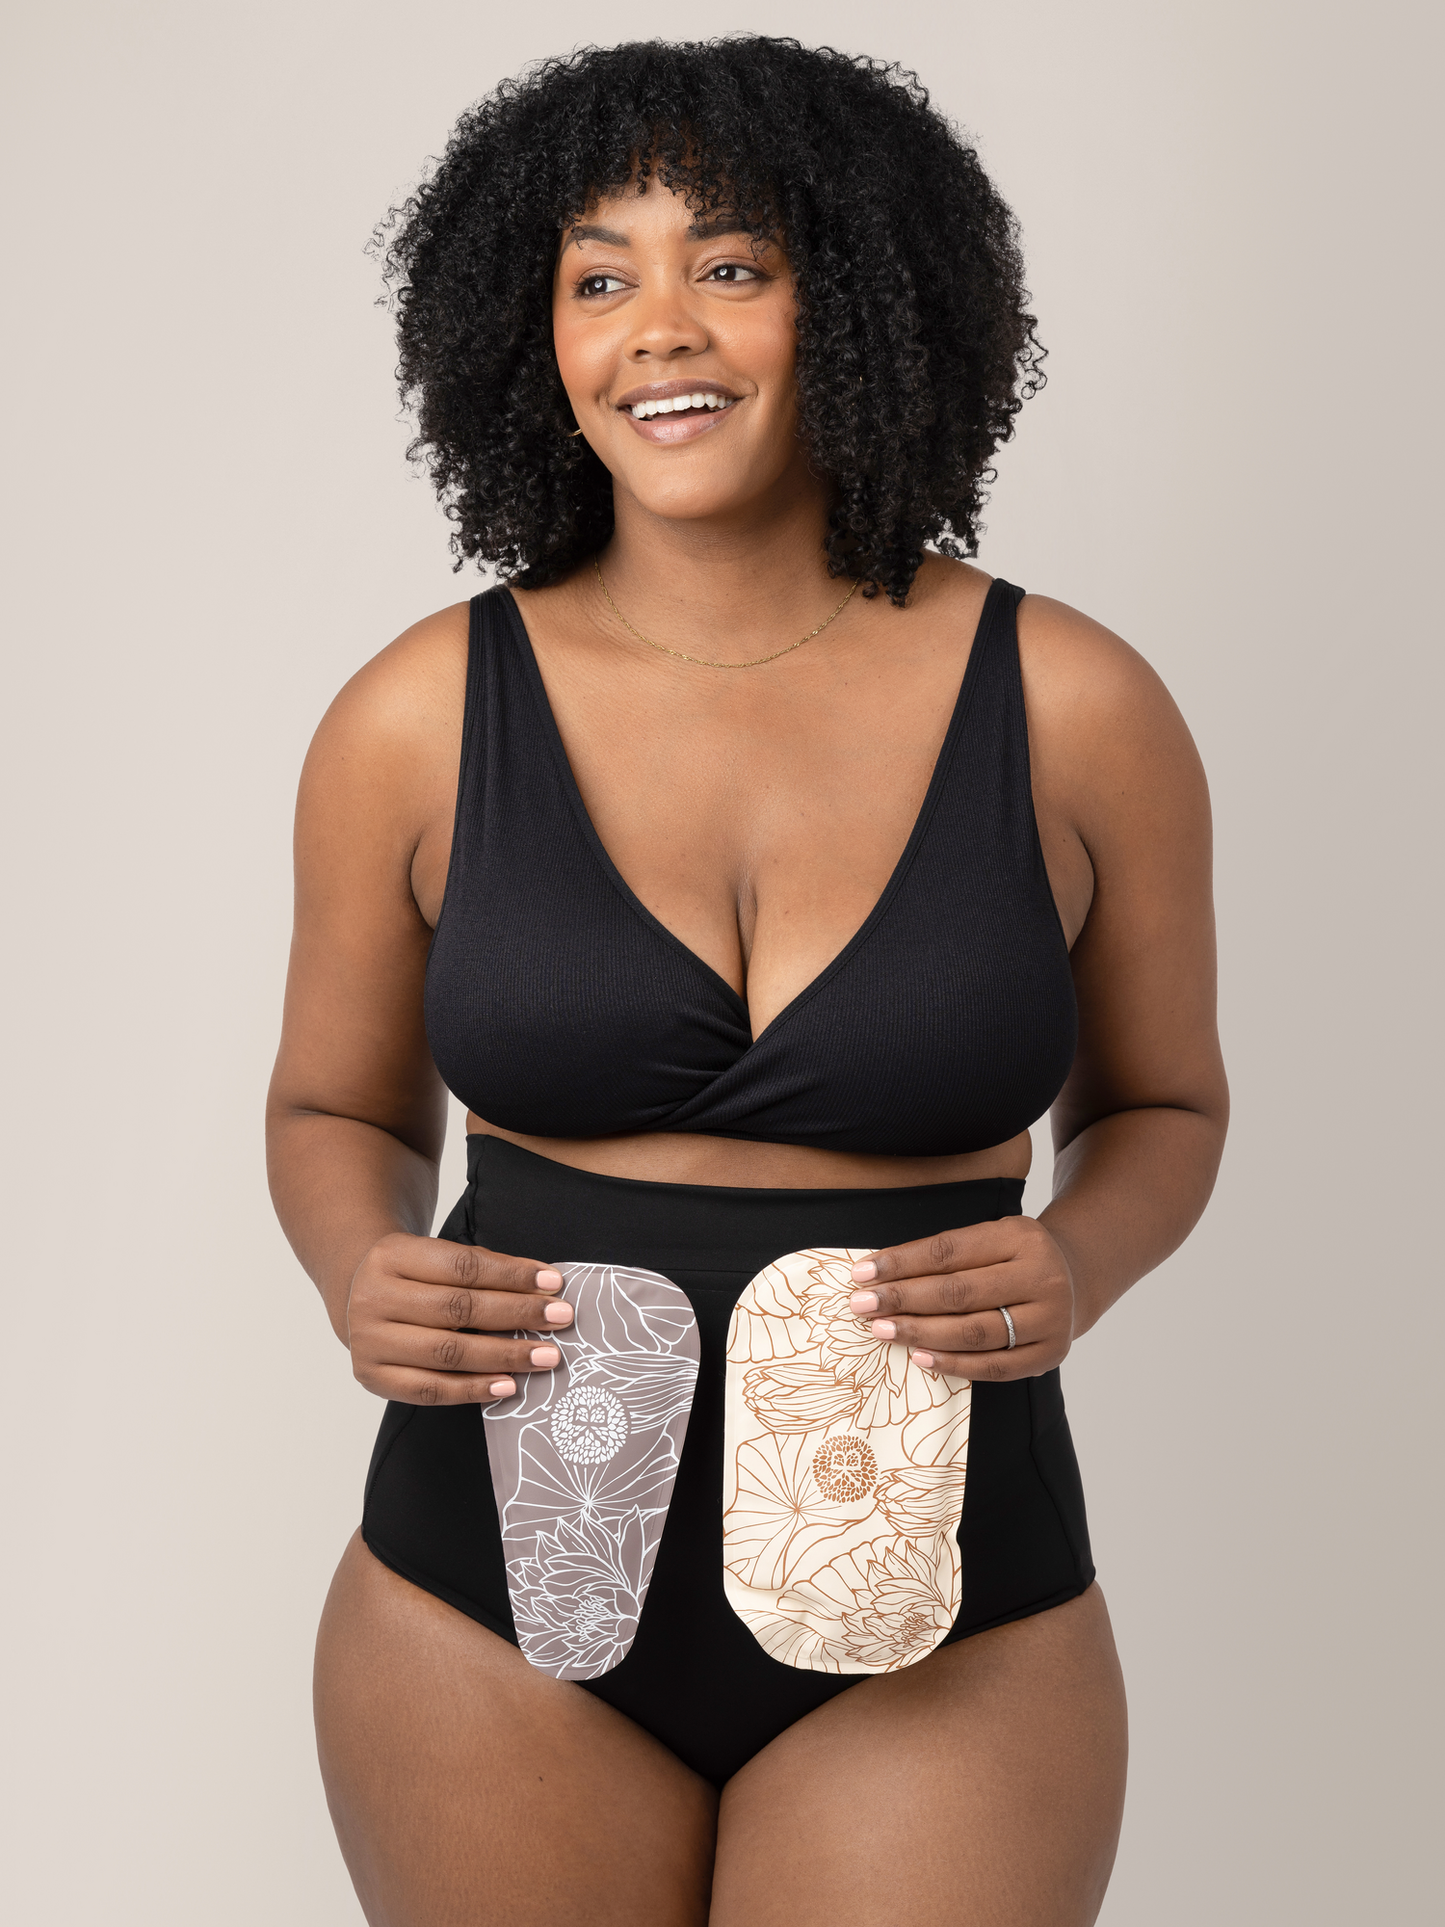 Model wearing the Soothing Fourth Trimester Underwear in Black wholding both forms of the soothing gel packs. 